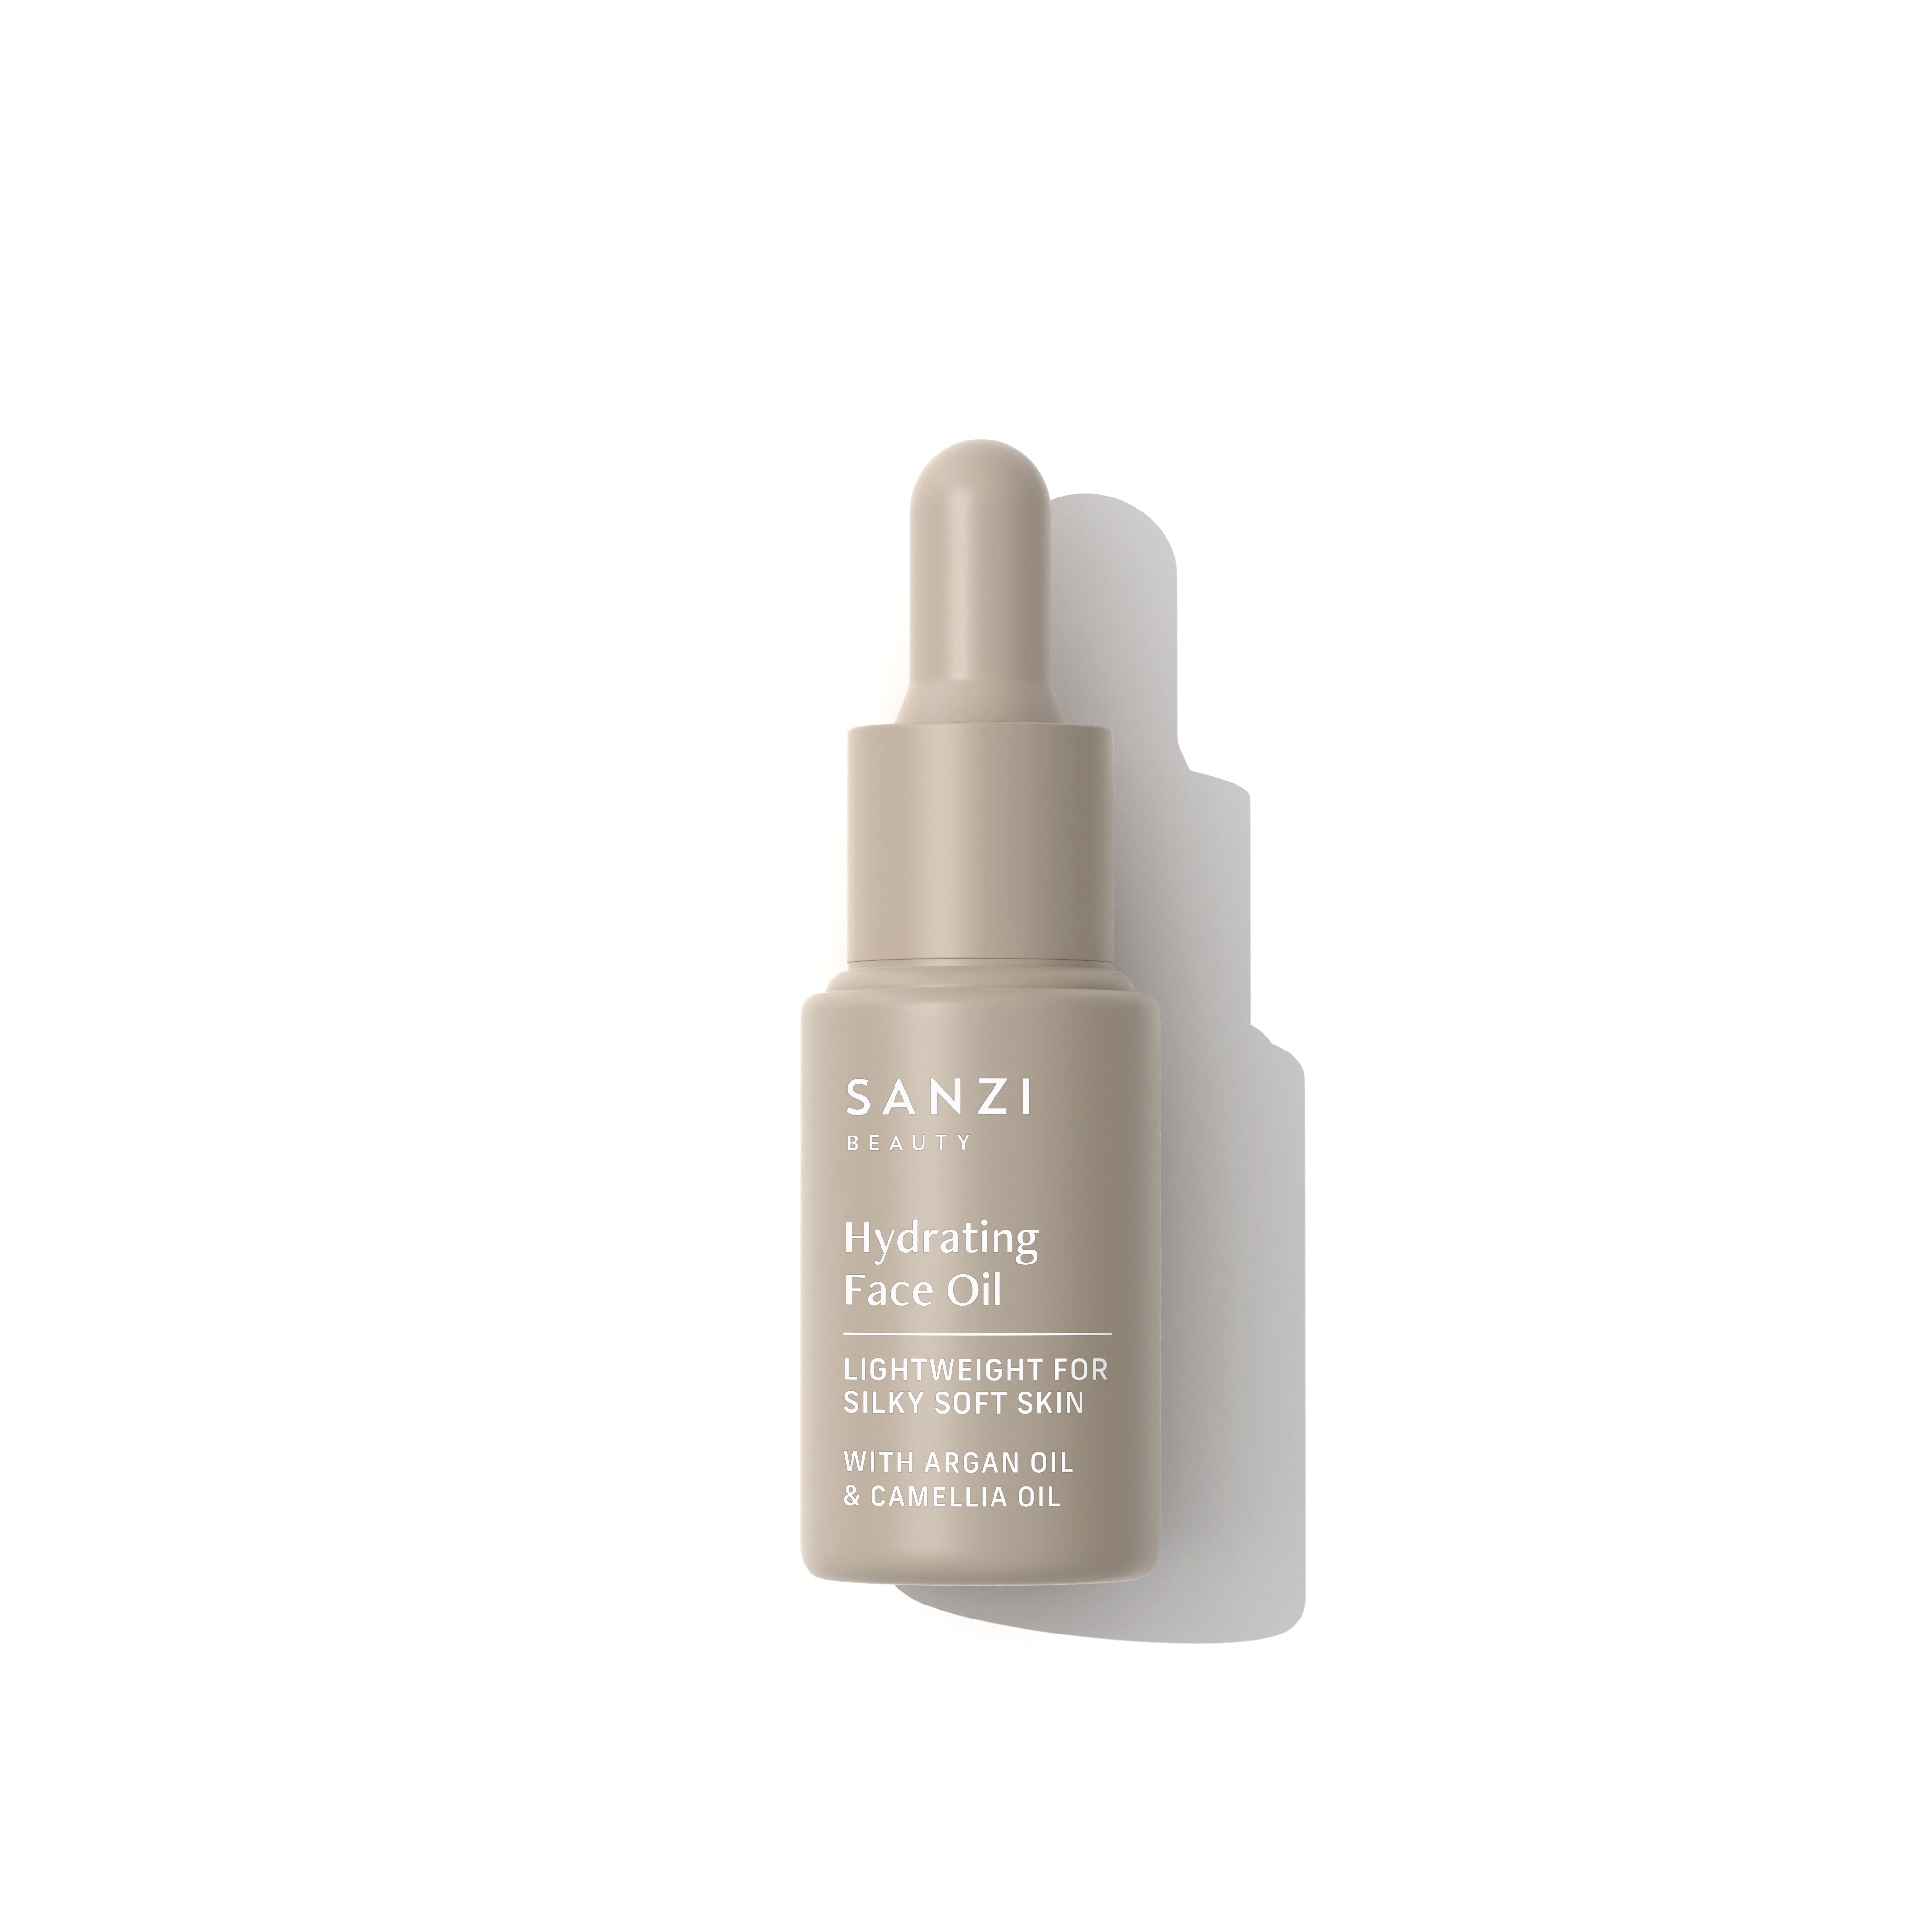 HYDRATING FACE OIL